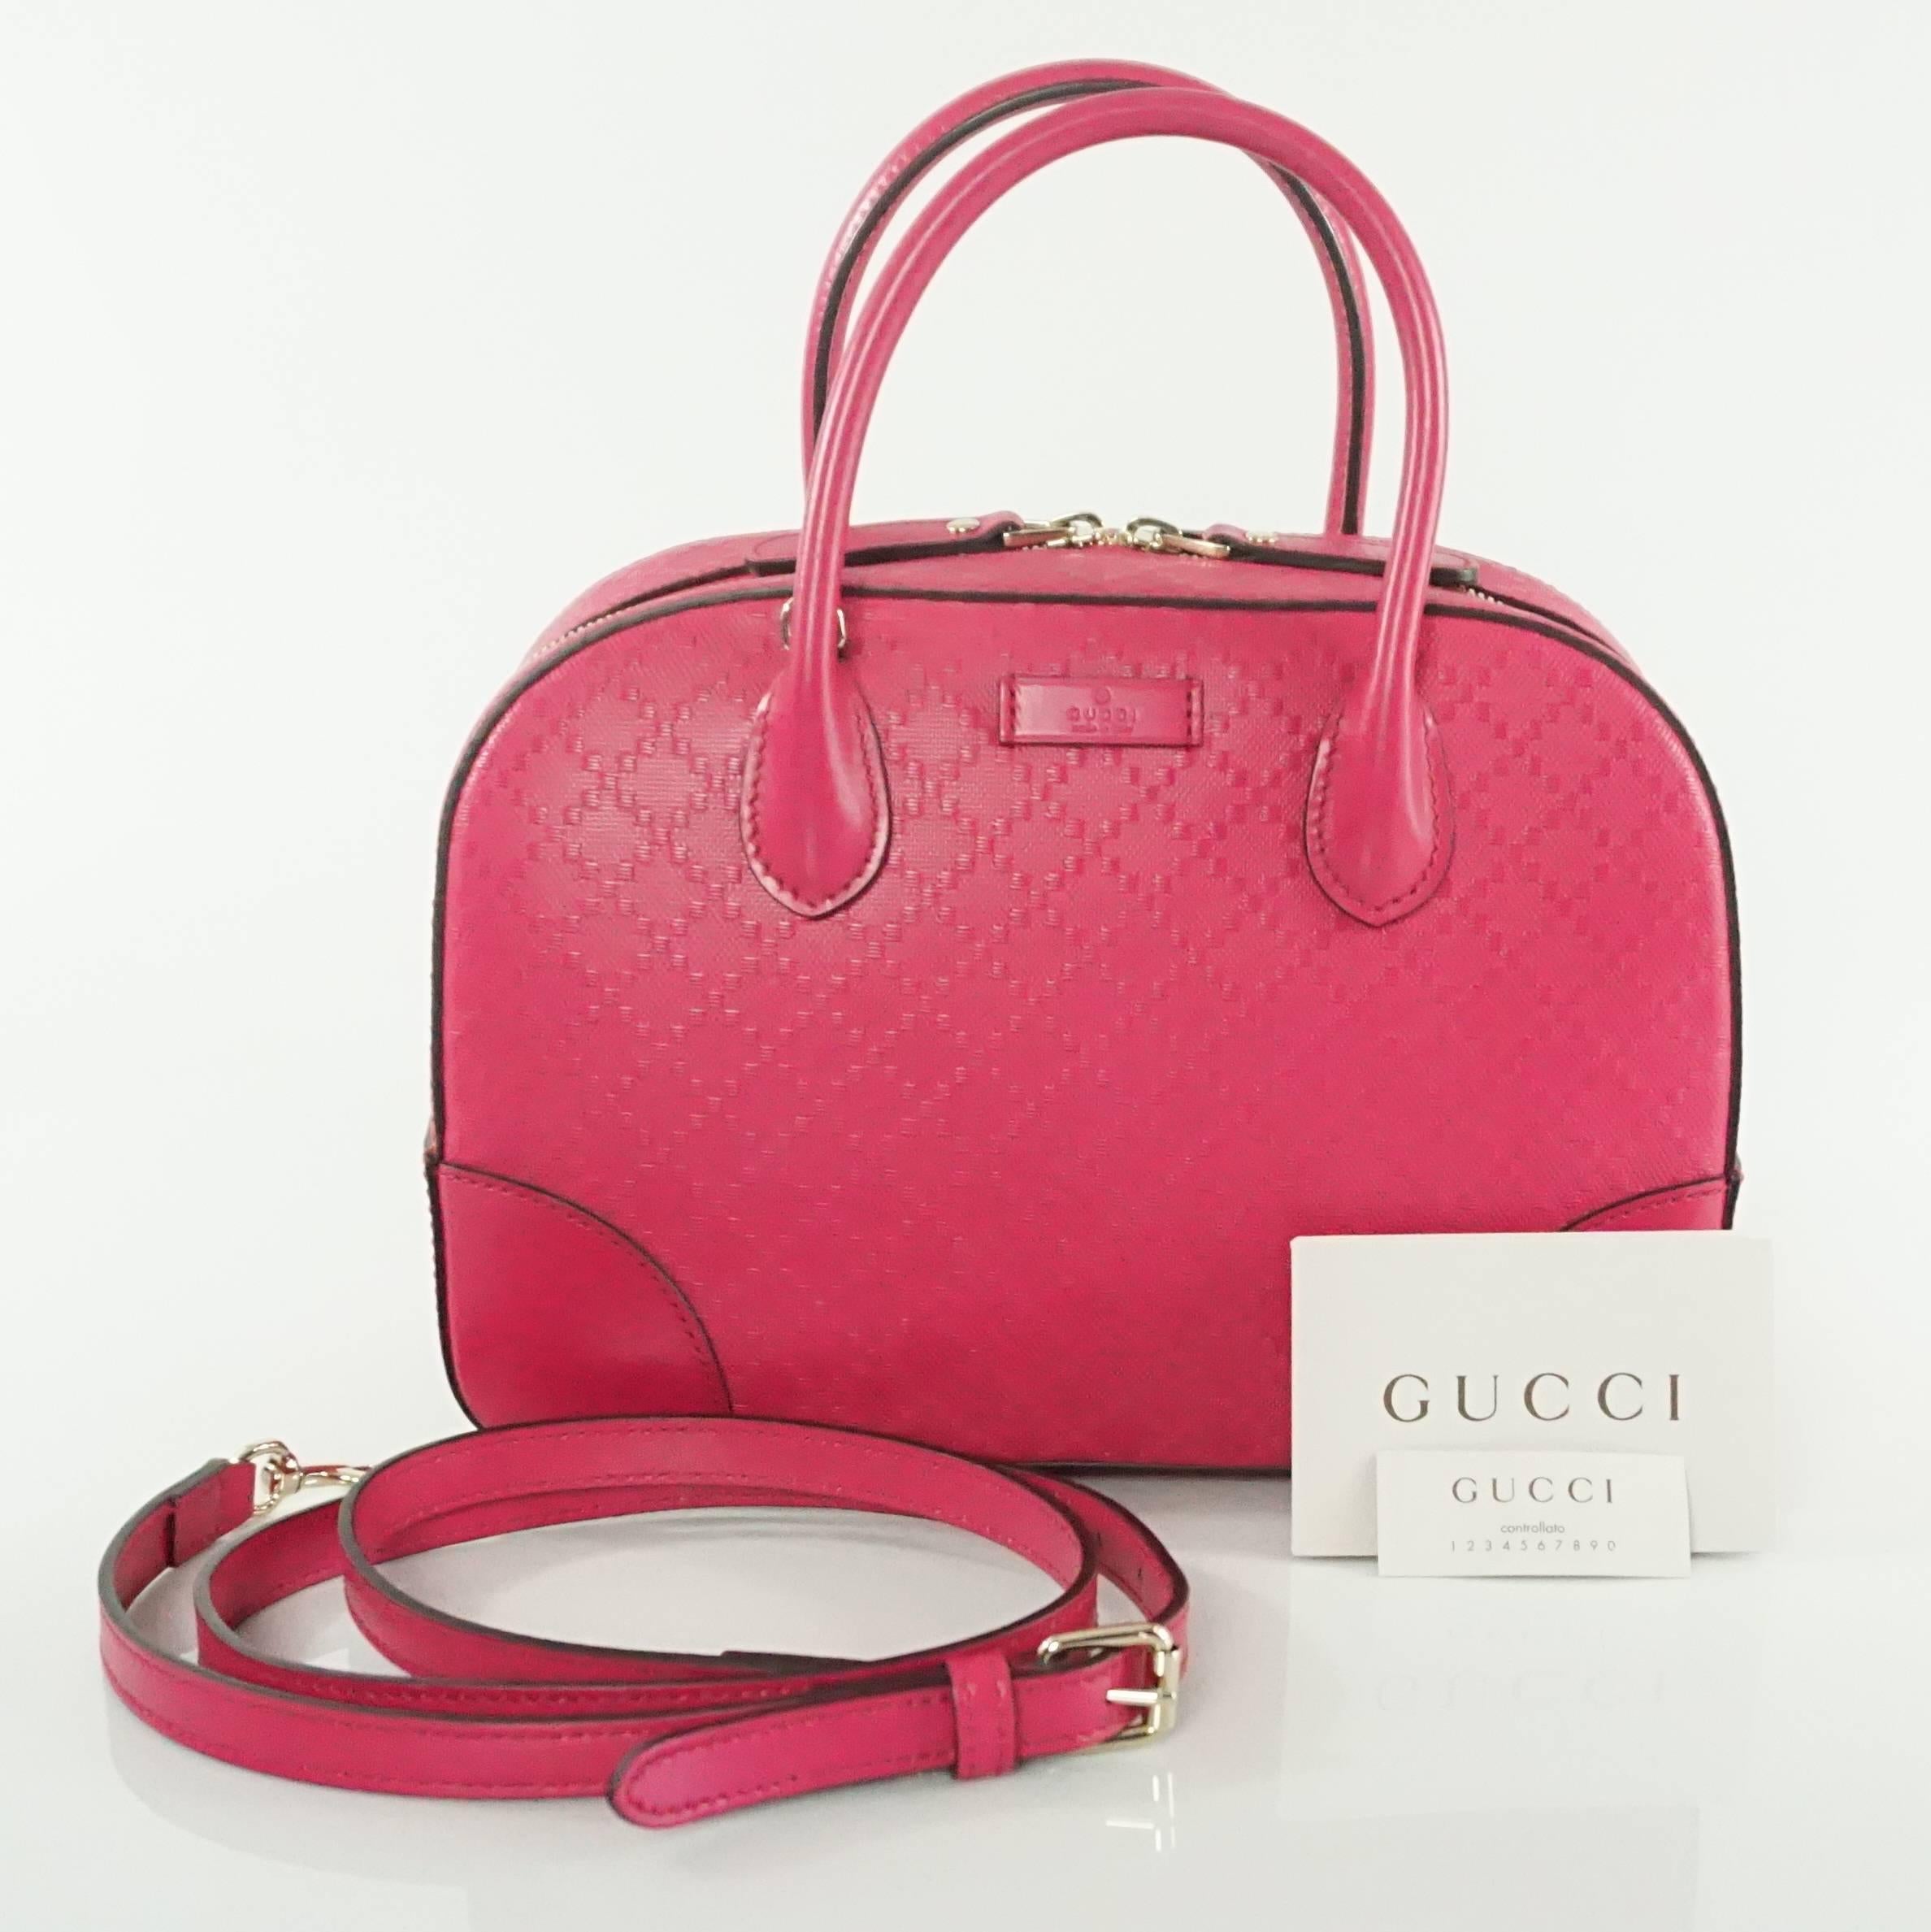 New Gucci Pink Diamante Top Handle Bag with Strap - 2015 2